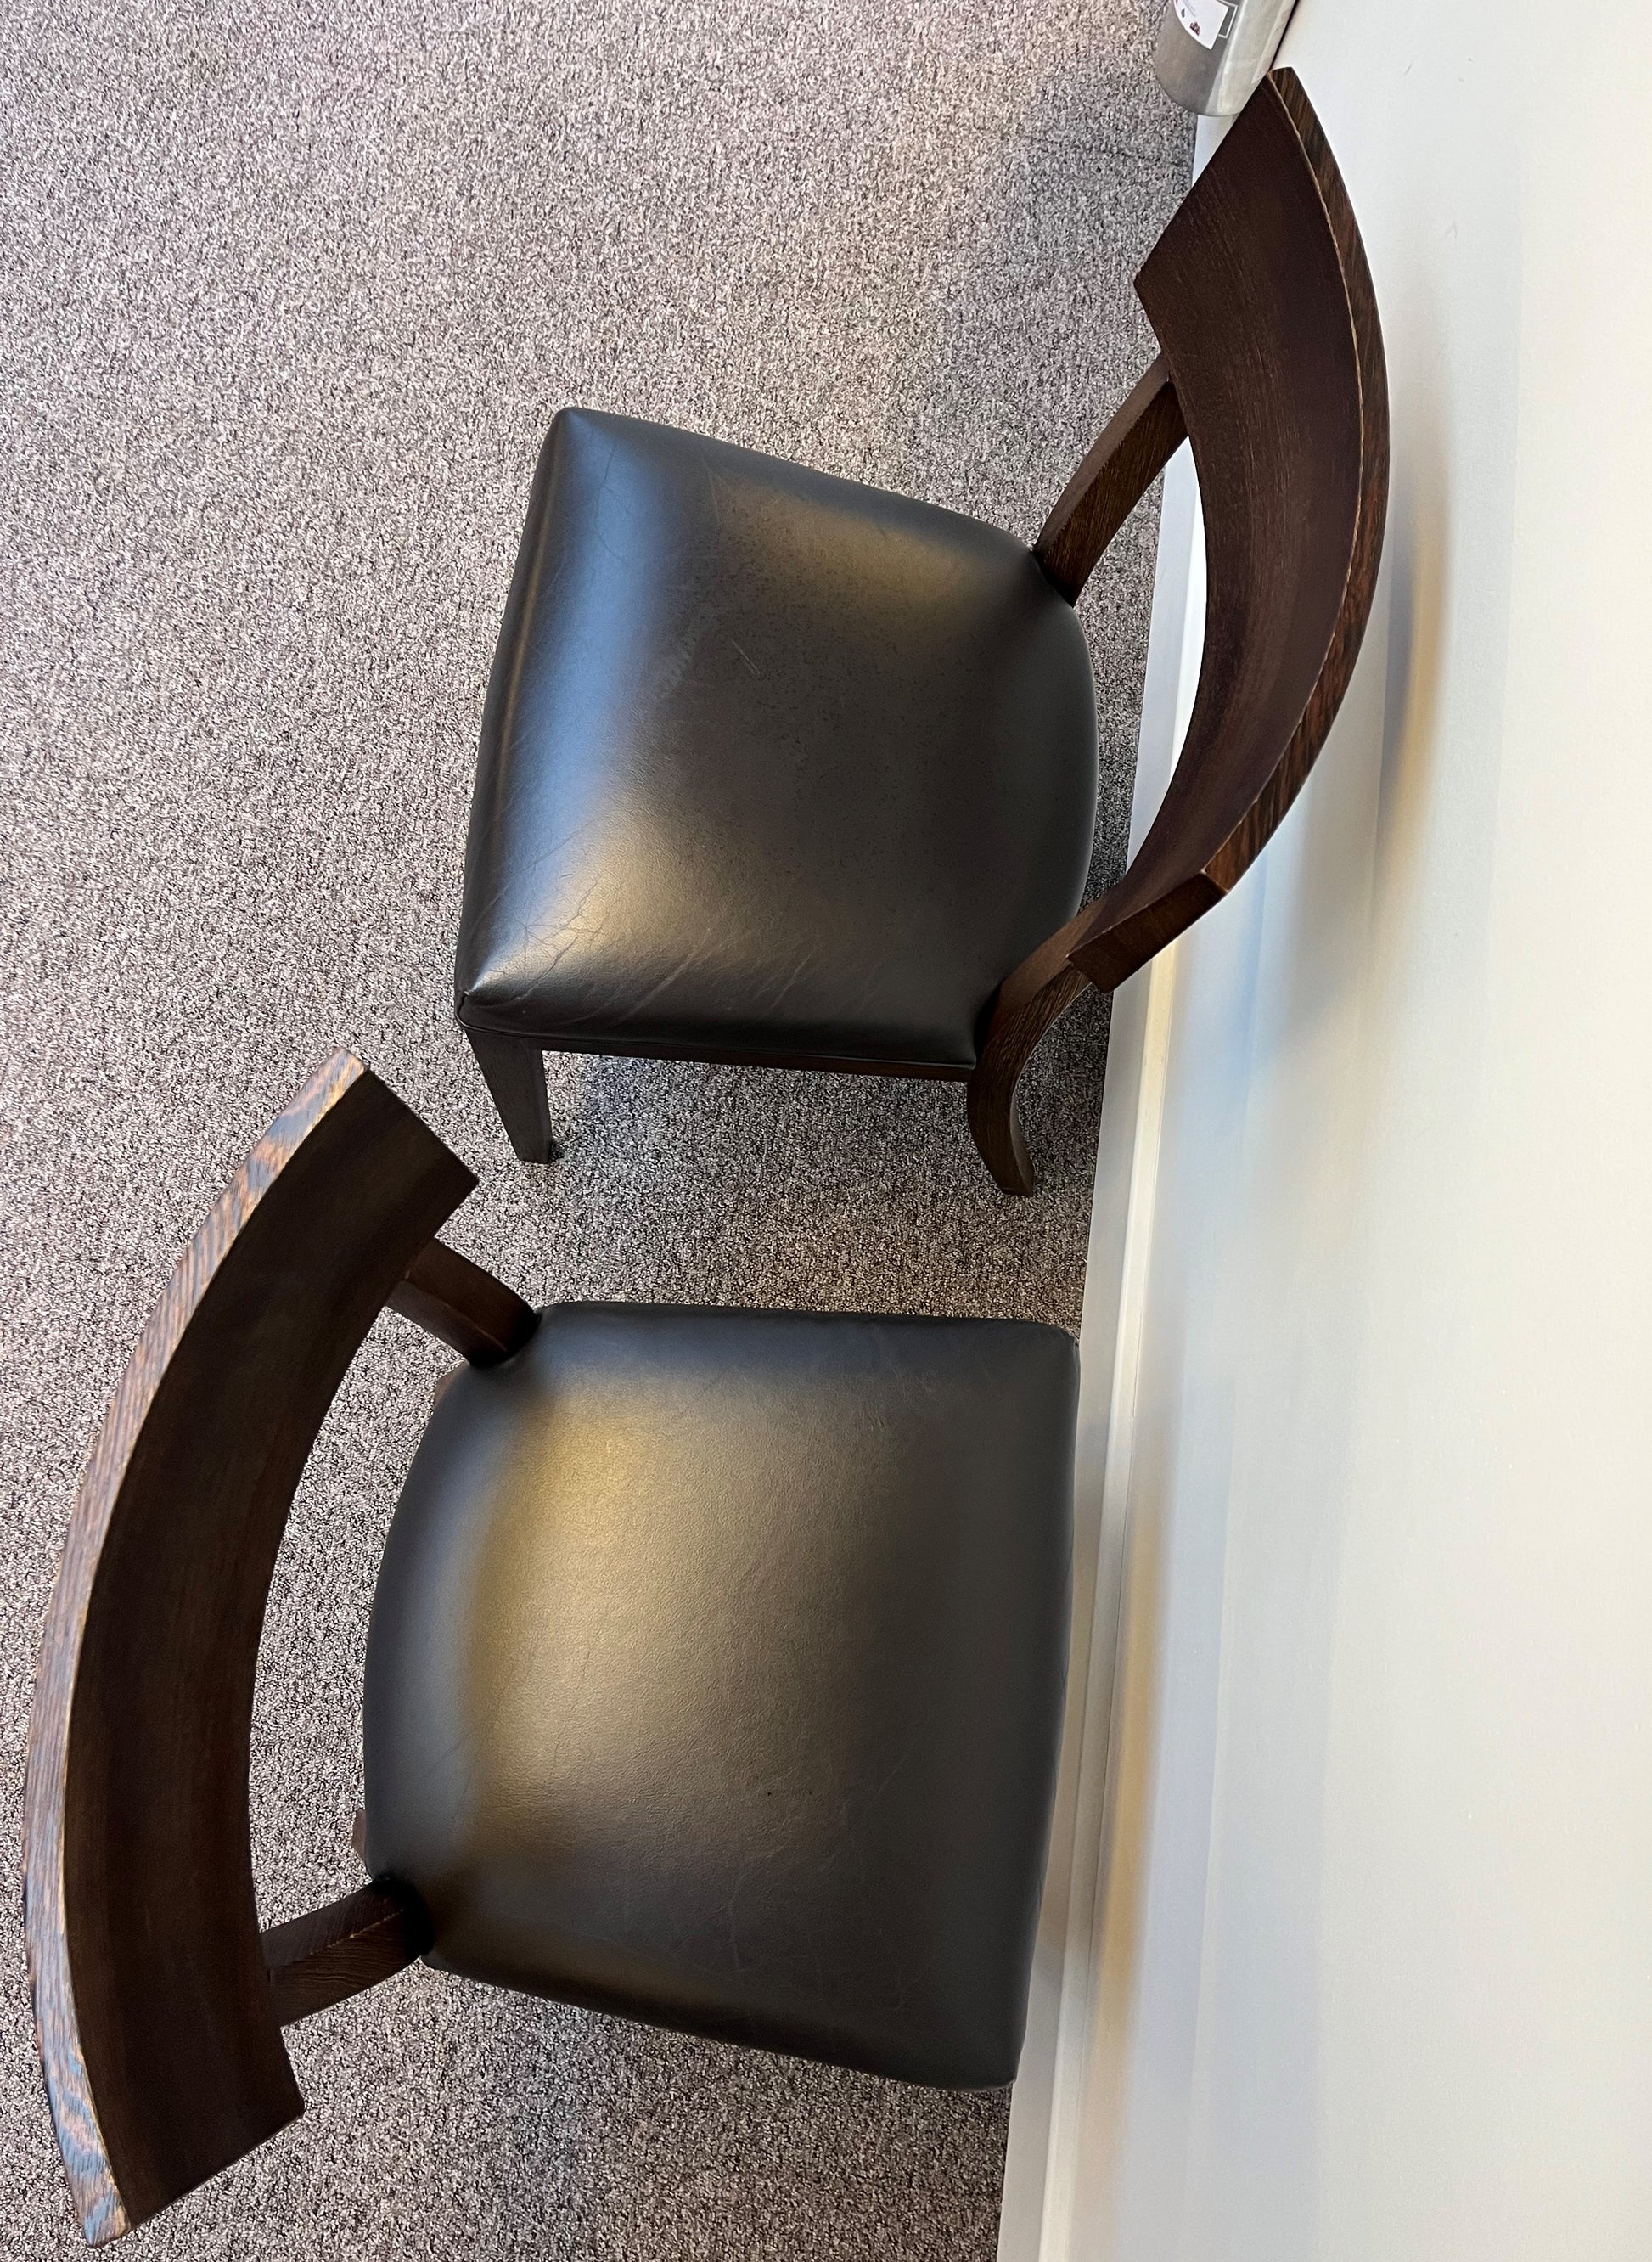 Promemoria Chairs - Preloved By Kelly